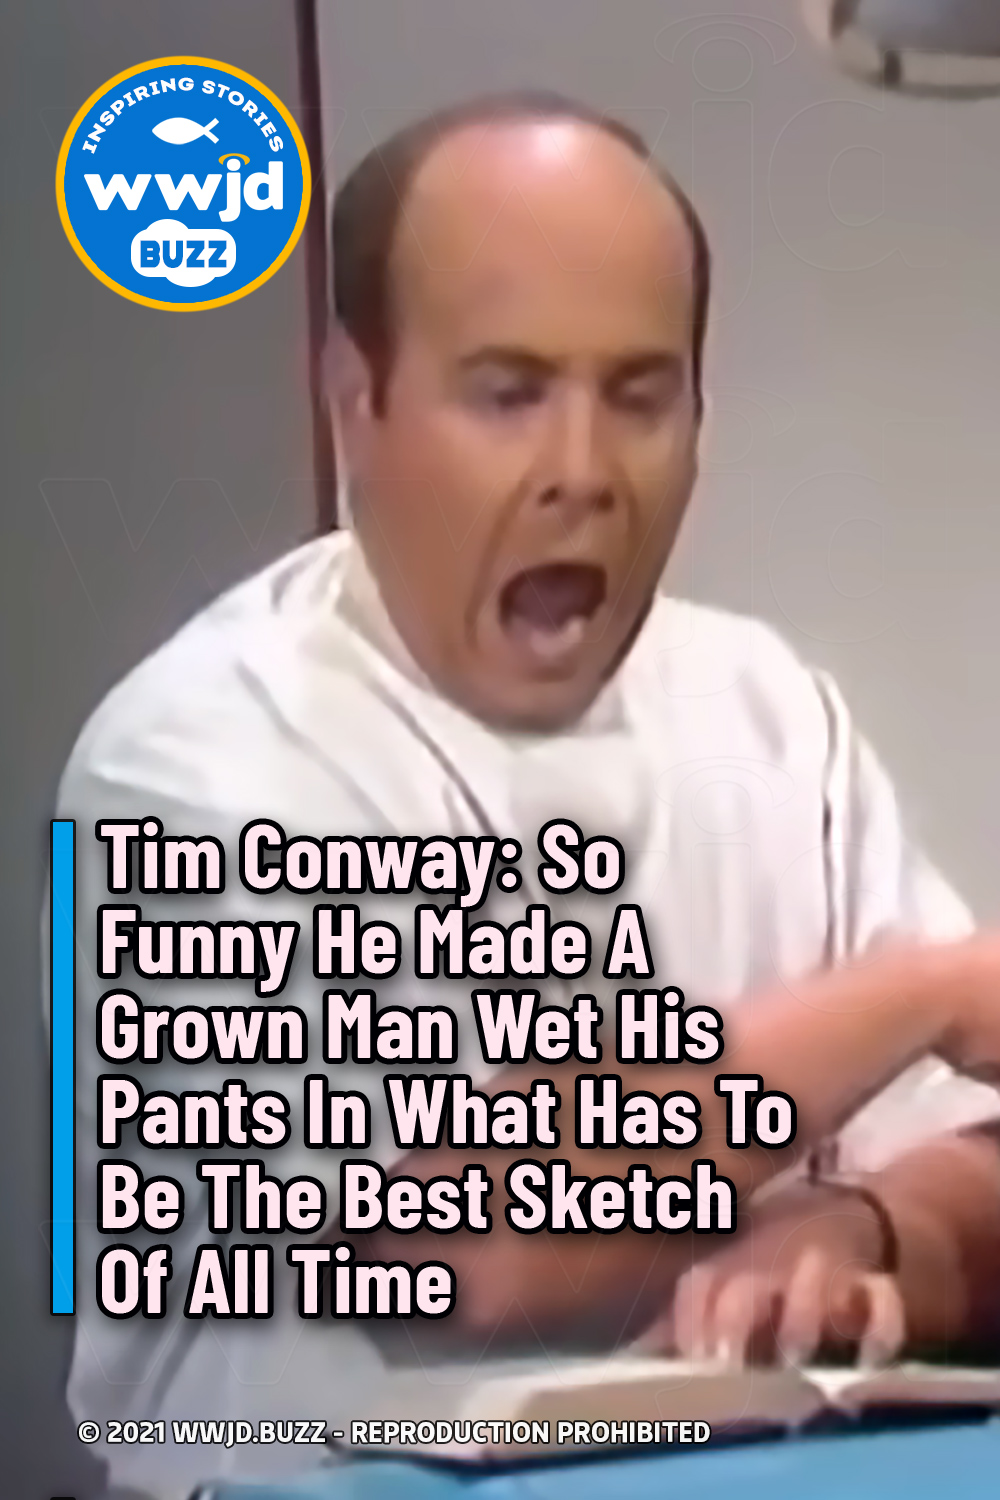 Tim Conway: So Funny He Made A Grown Man Wet His Pants In What Has To Be The Best Sketch Of All Time